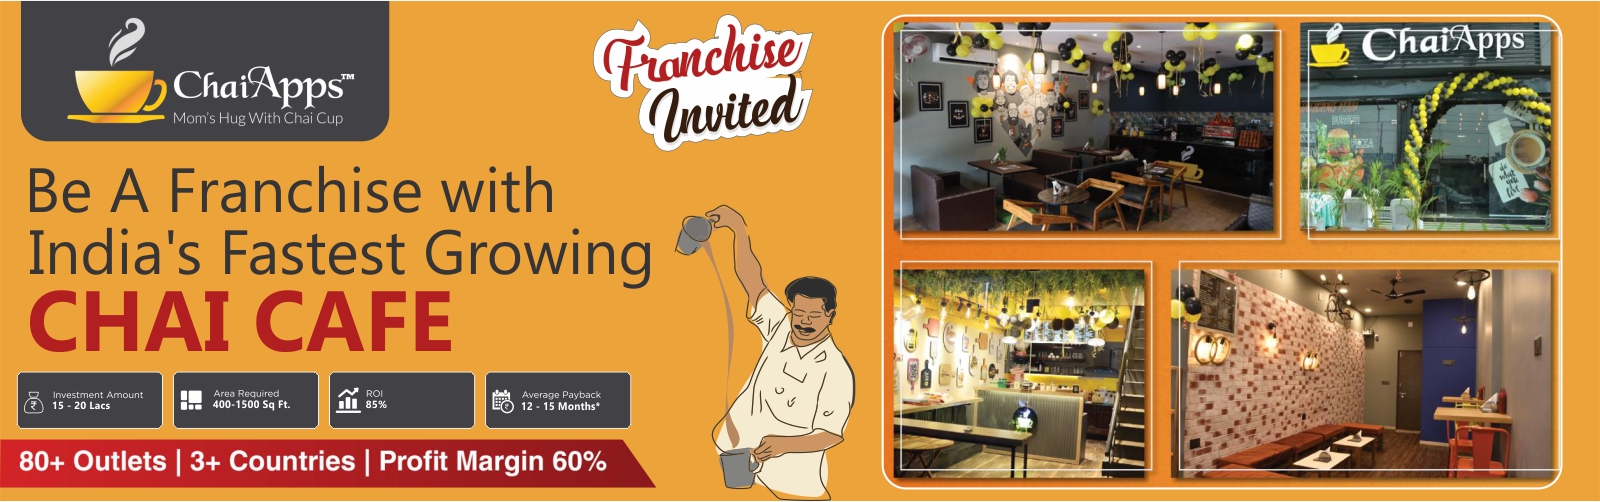 admin/uploads/brand_registration/Chaiapps - Be A Franchise With India's Fastest Growing Chai Cafe